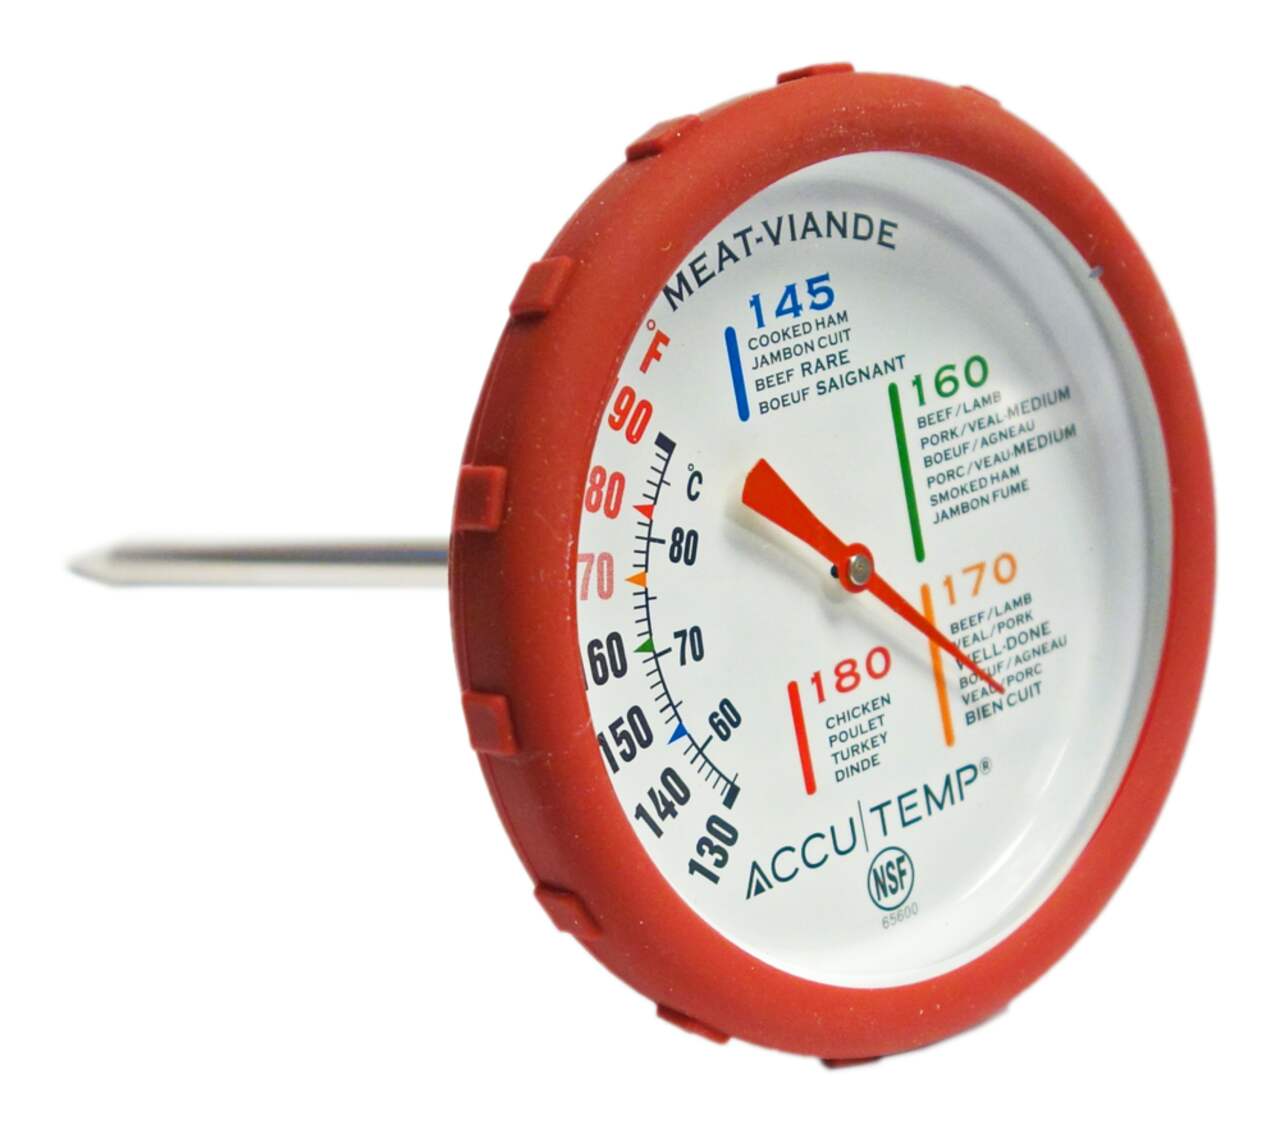 https://media-www.canadiantire.ca/product/living/kitchen/kitchen-tools-thermometers/0421608/accutemp-meat-and-poultry-thermometer-with-silicone-ring-c5d6c9e8-789a-4057-aa72-f88a28b66170.png?imdensity=1&imwidth=640&impolicy=mZoom